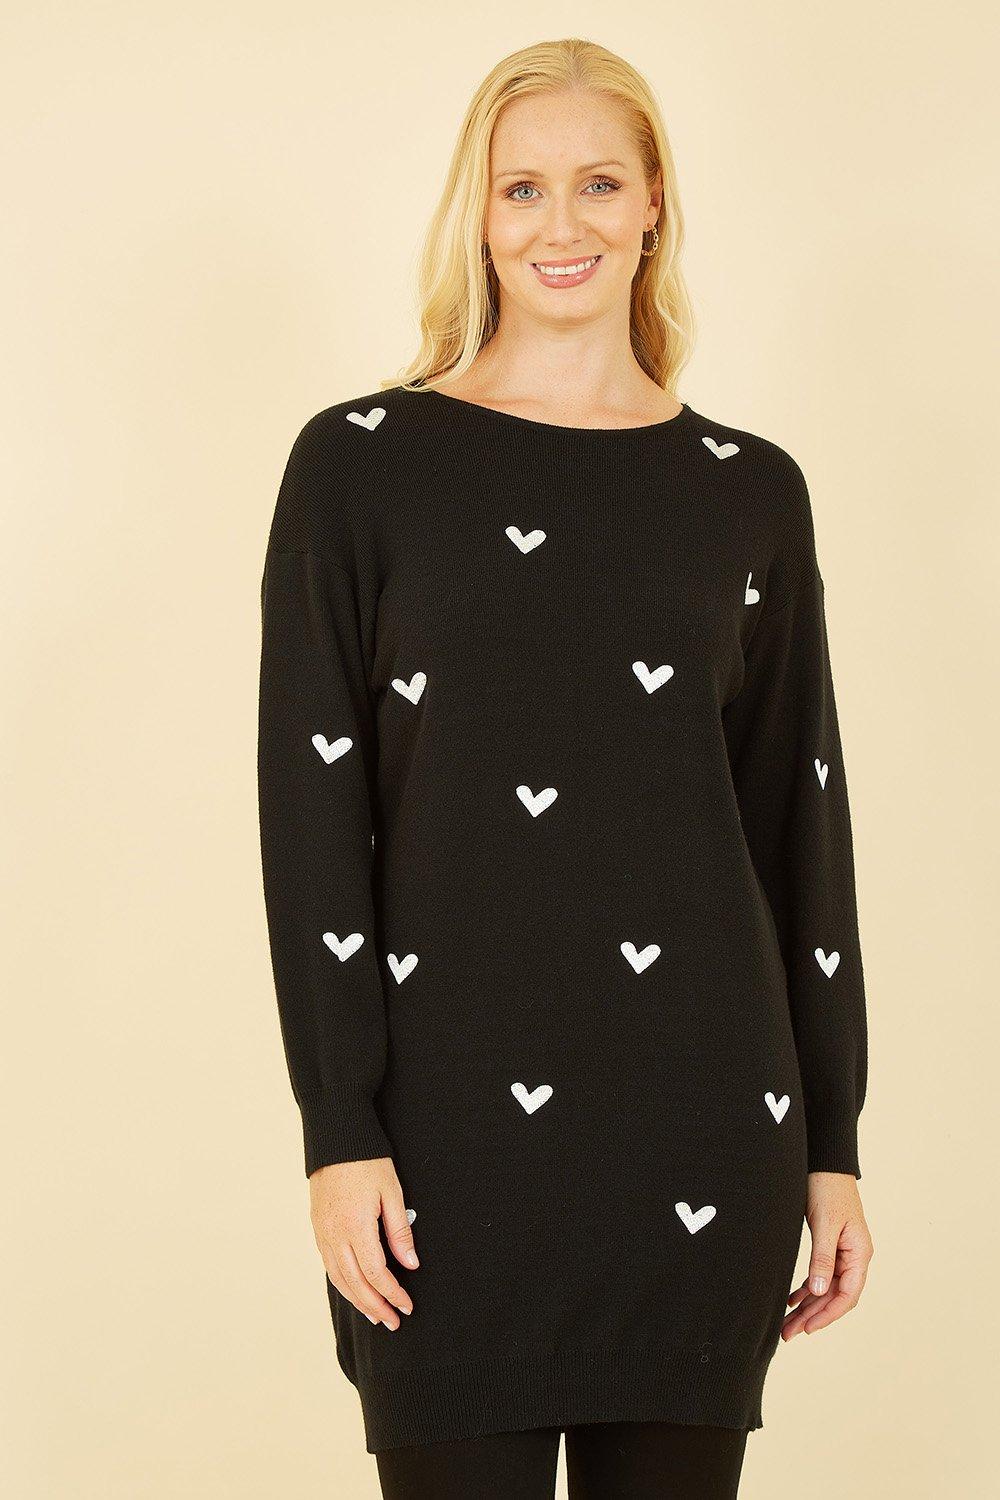 Black Embroidered Heart Print Tunic Dress